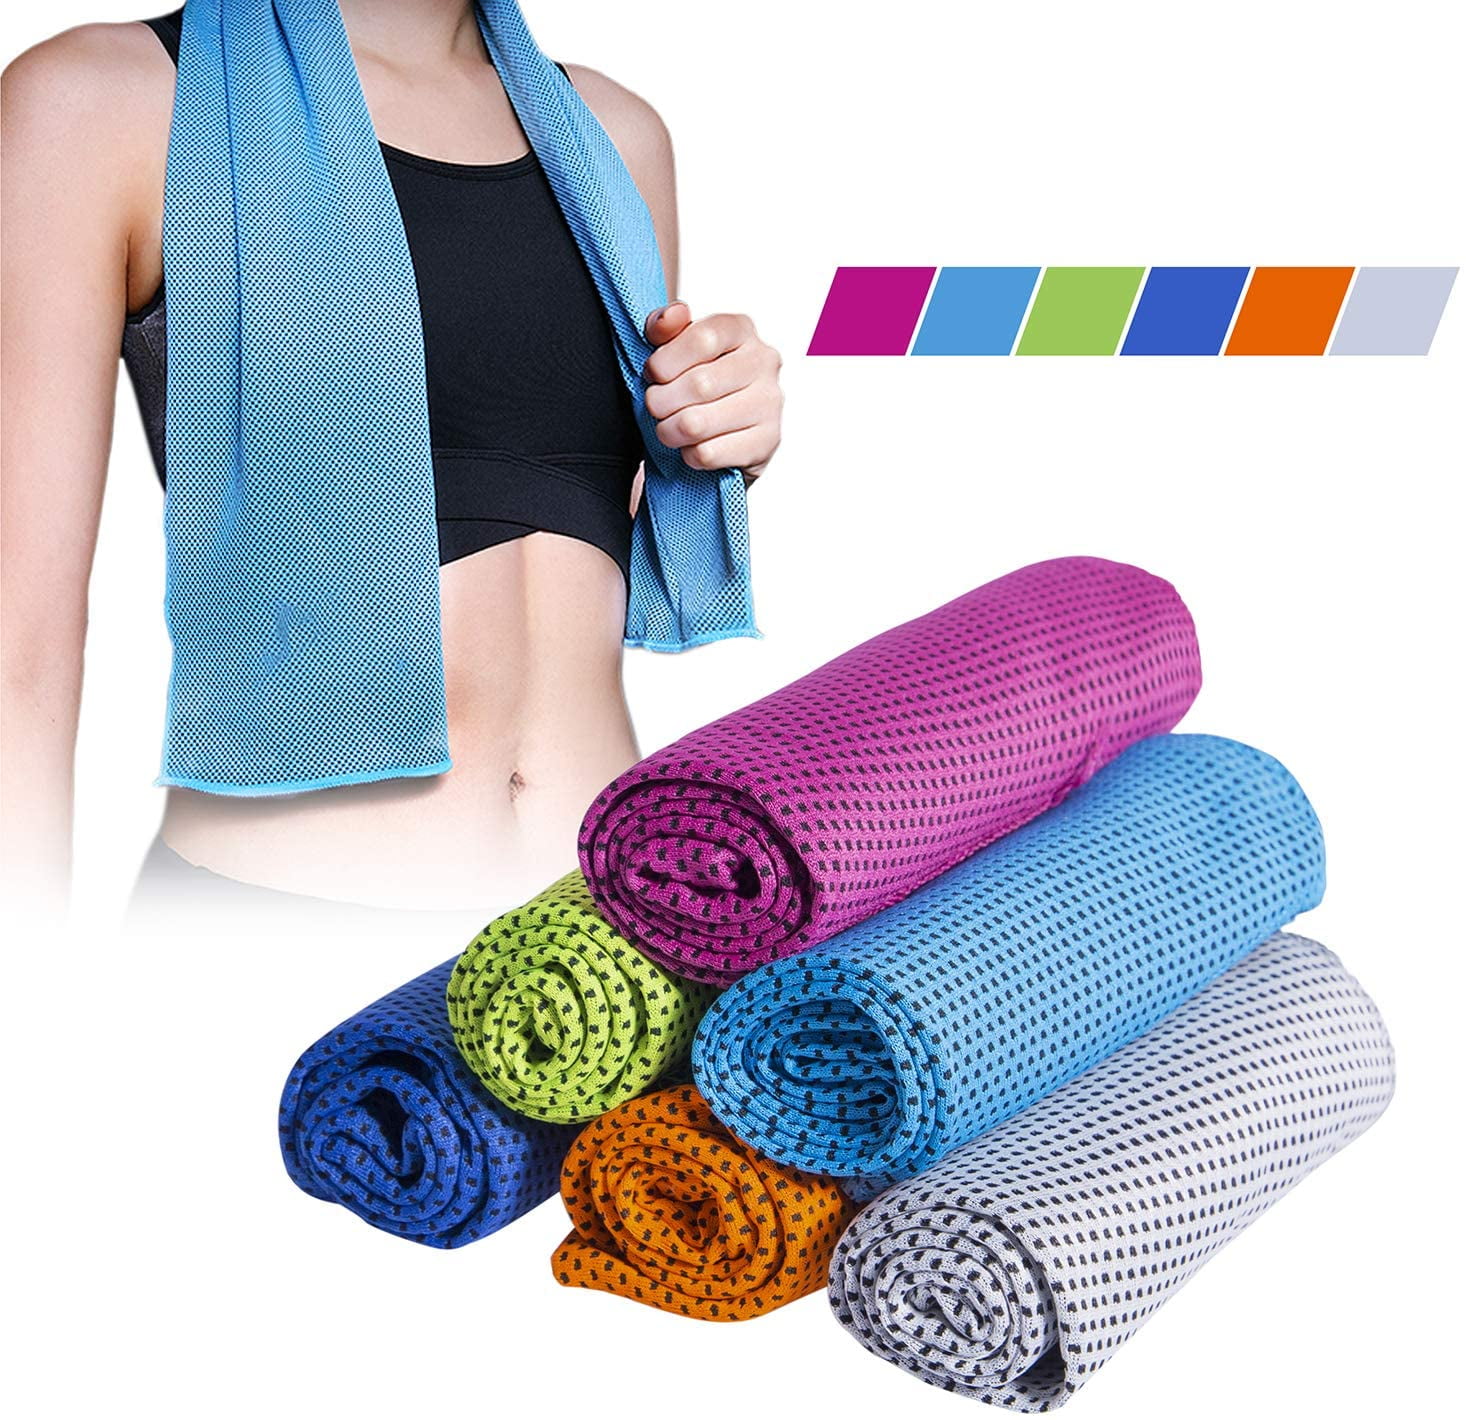 Sport Cool Towels for Neck and Face- Super Absorbent Yoga Quick Dry Cooling Towel Set of 5- Microfiber Towel Reusable- Work for Sports Gym Fitness. 